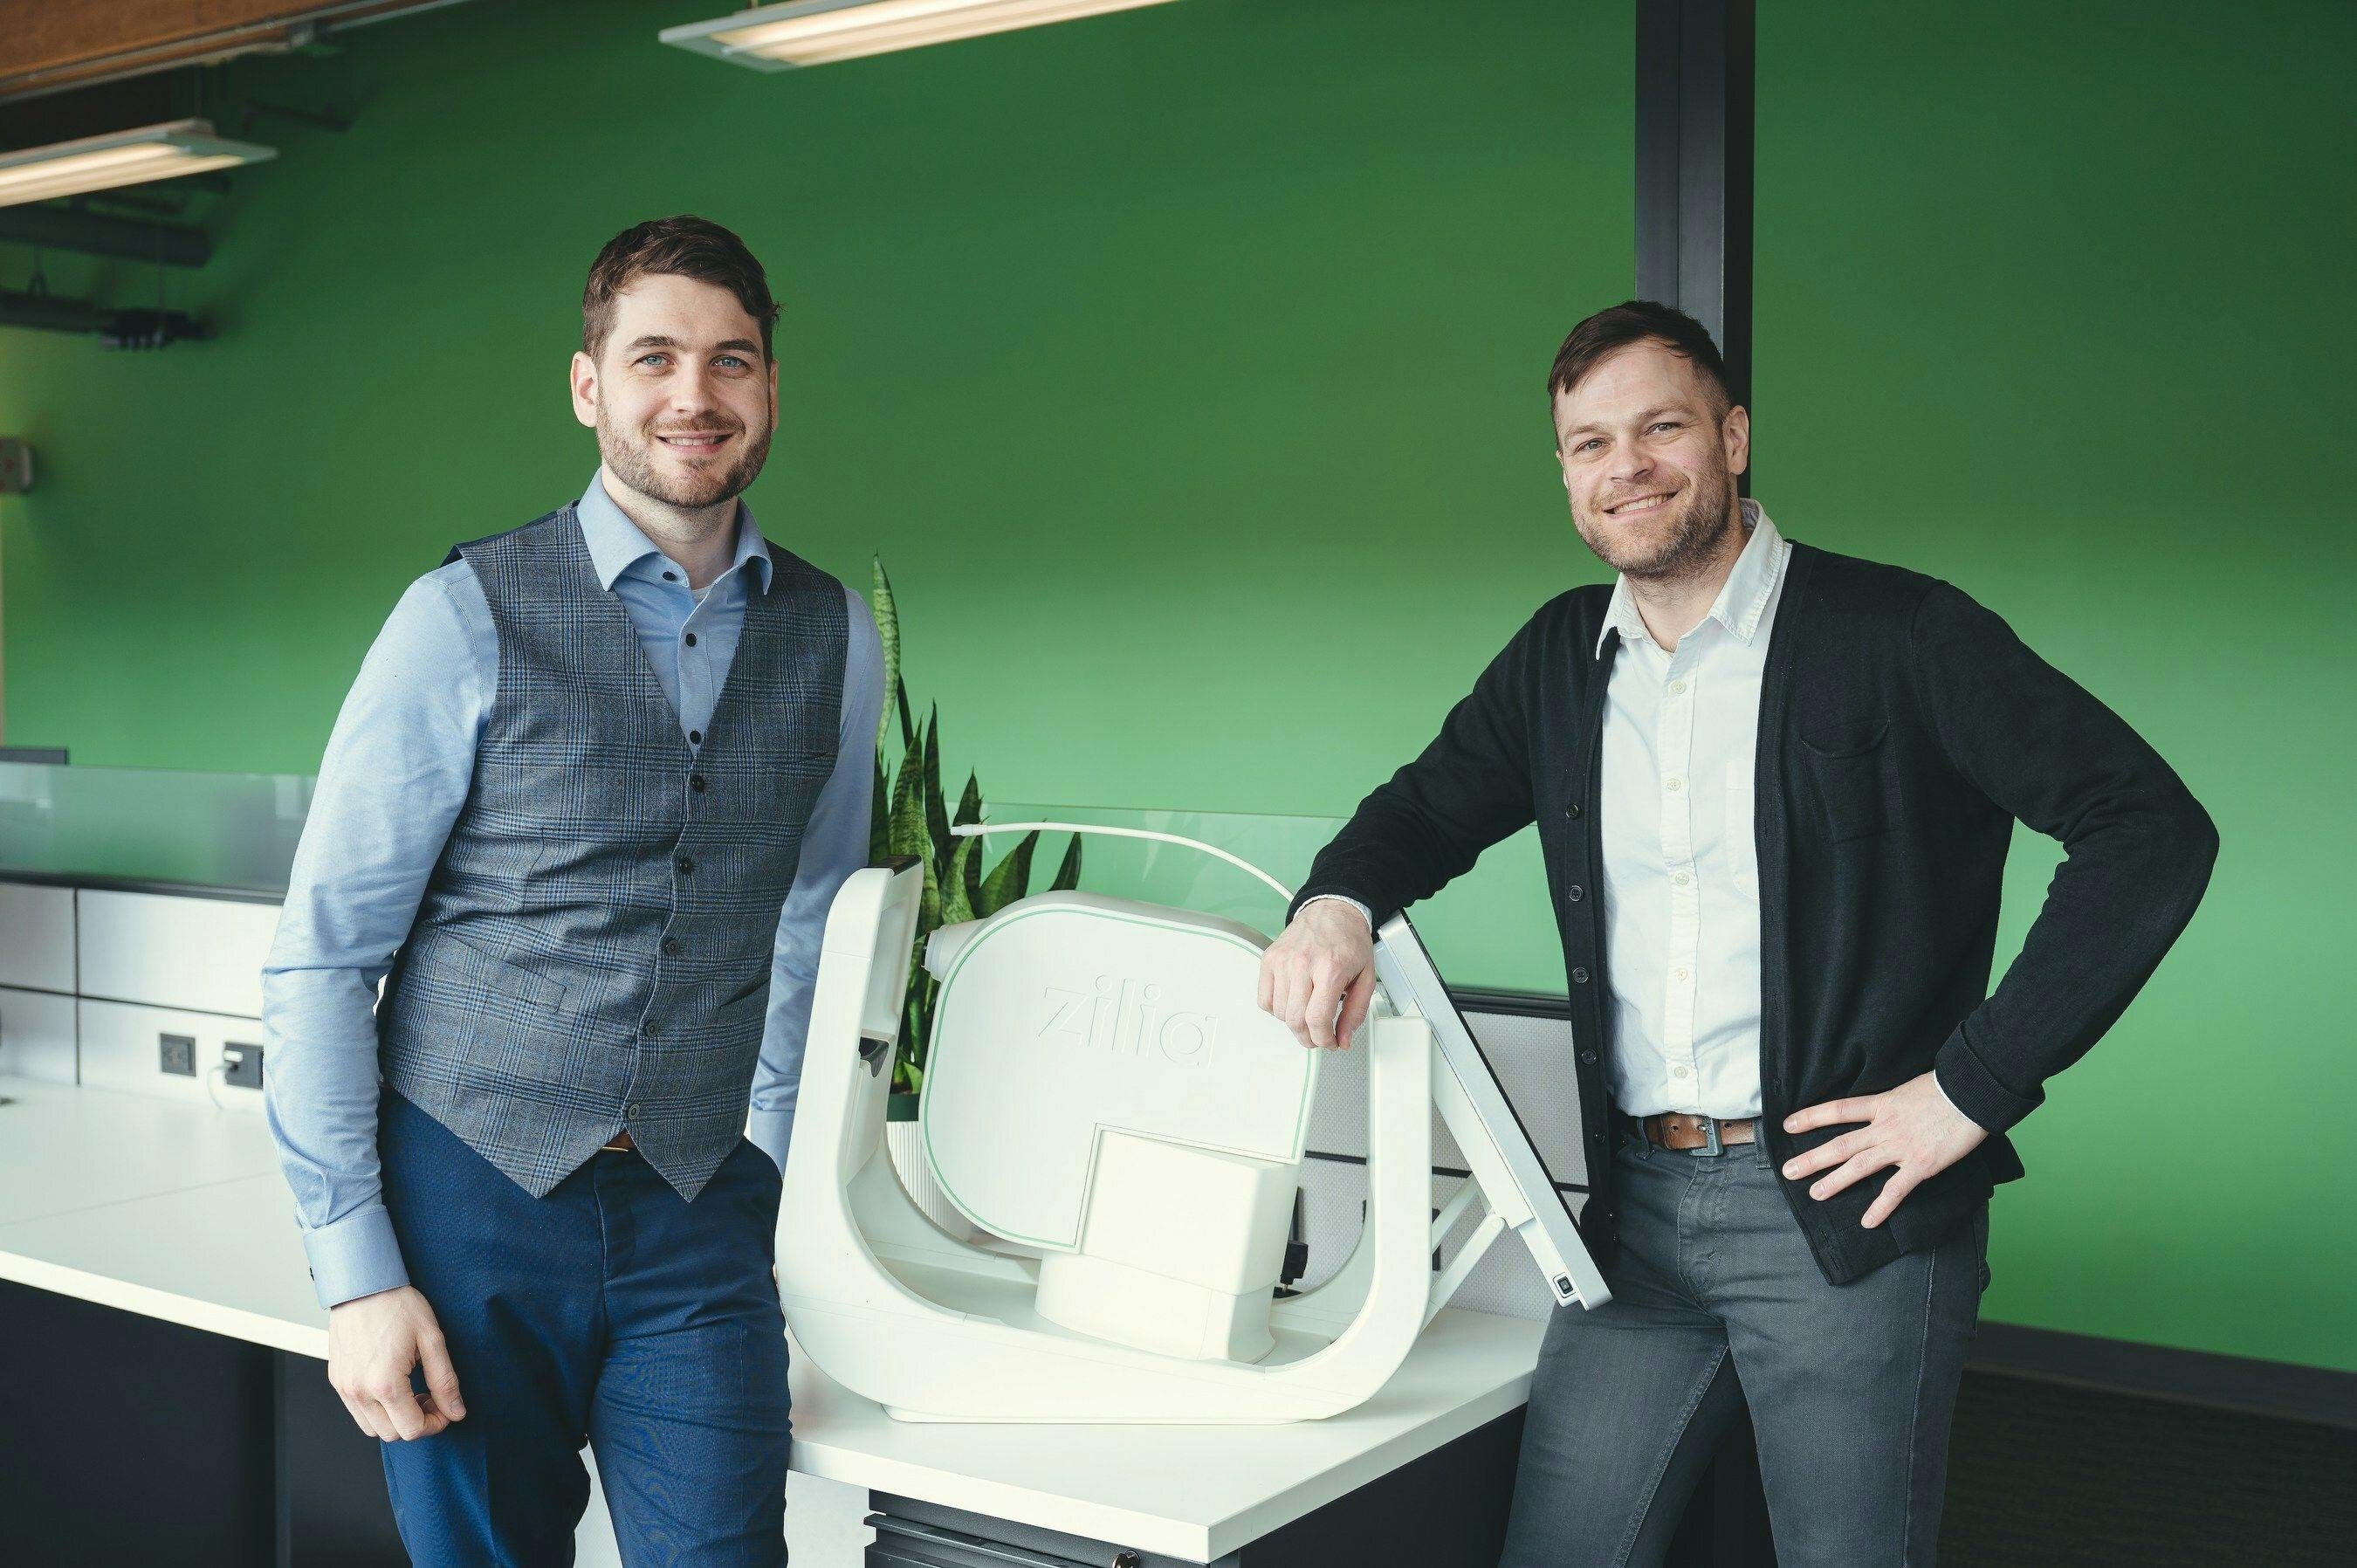 Co-founders Patrick Sauvageau, CEO, and Dominic Sauvageau, CTO with the Zilia Ocular FC. (Image courtesy of CNW Group/Zilia)